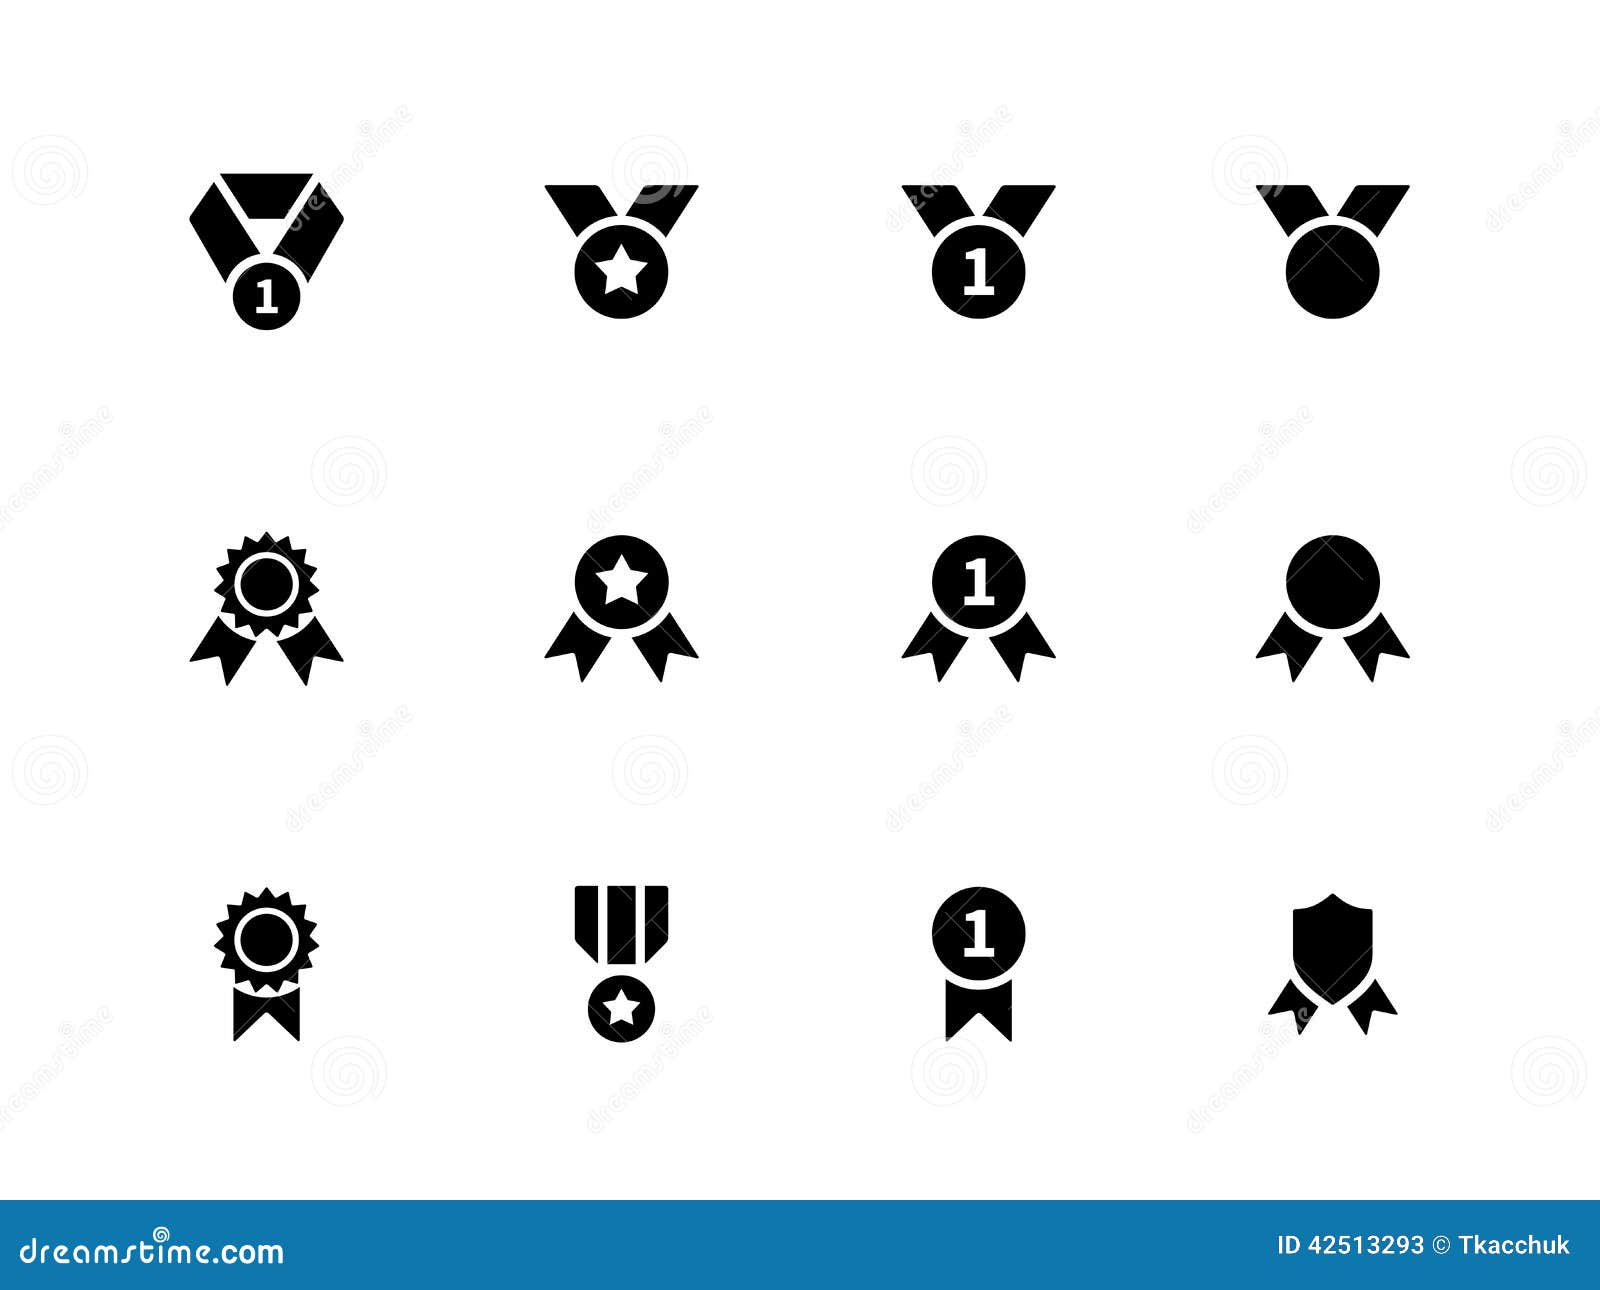 award and medal icons on white background.